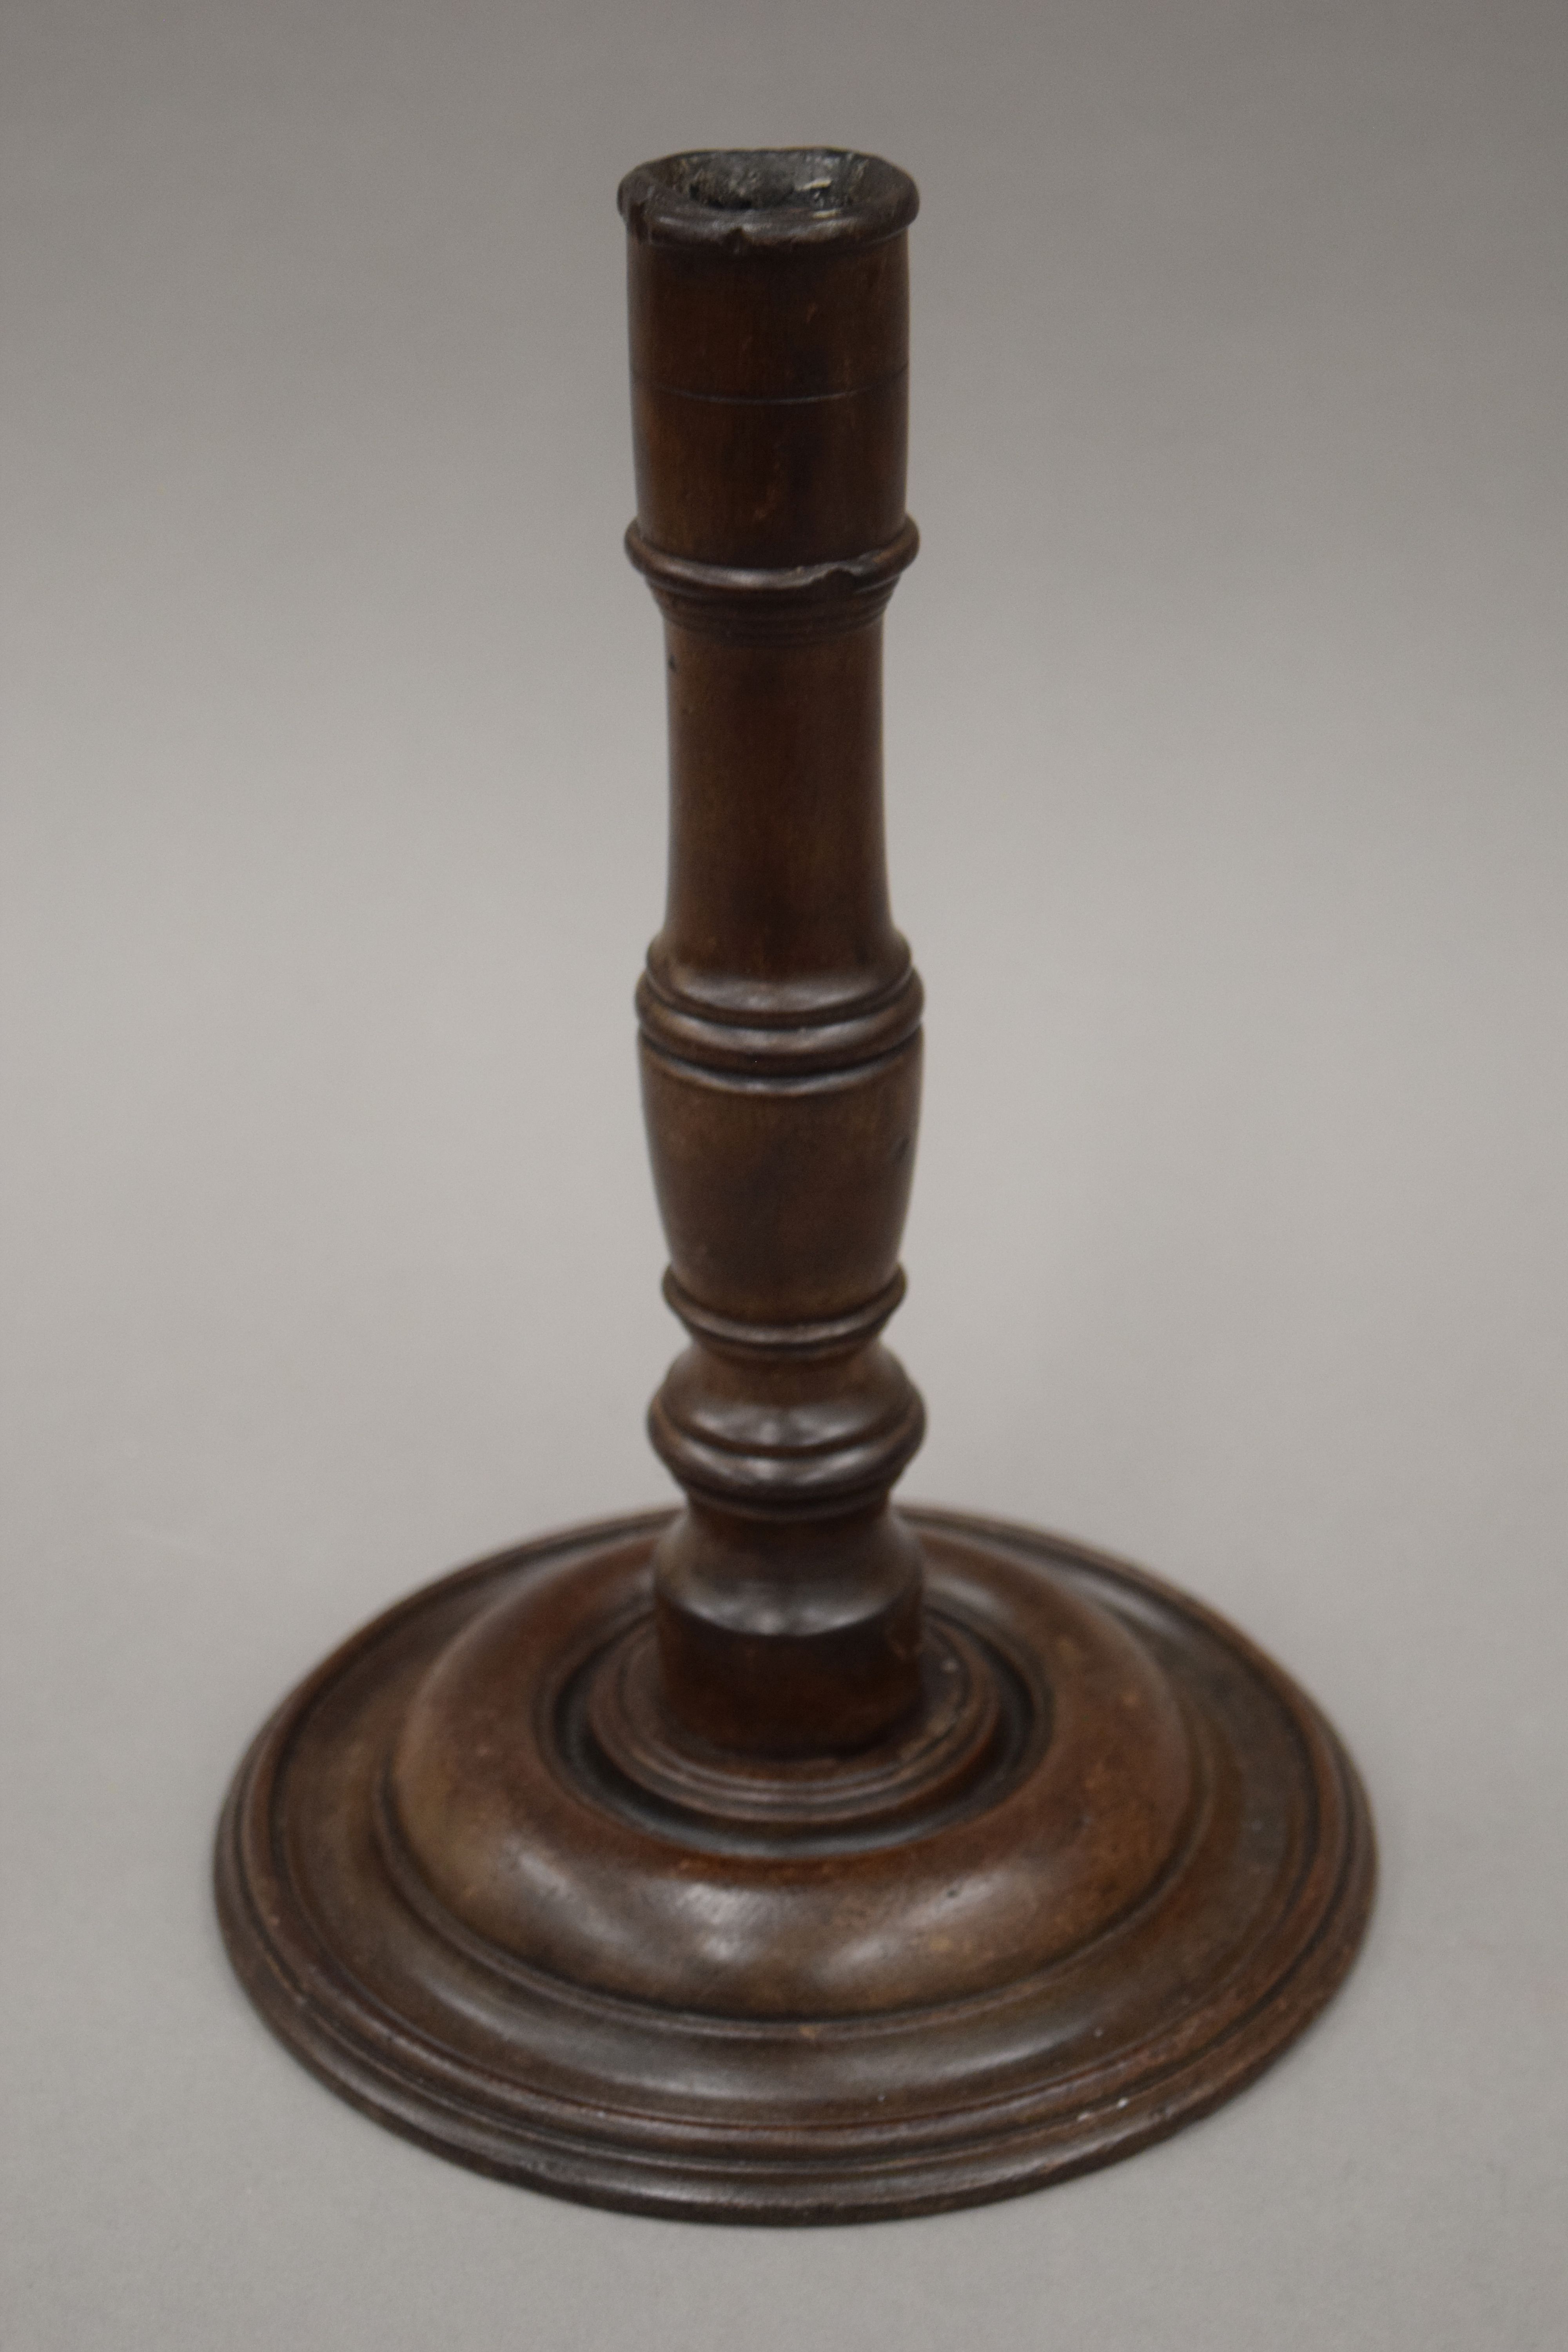 A 19th century turned wooden candlestick. 24.5 cm high.